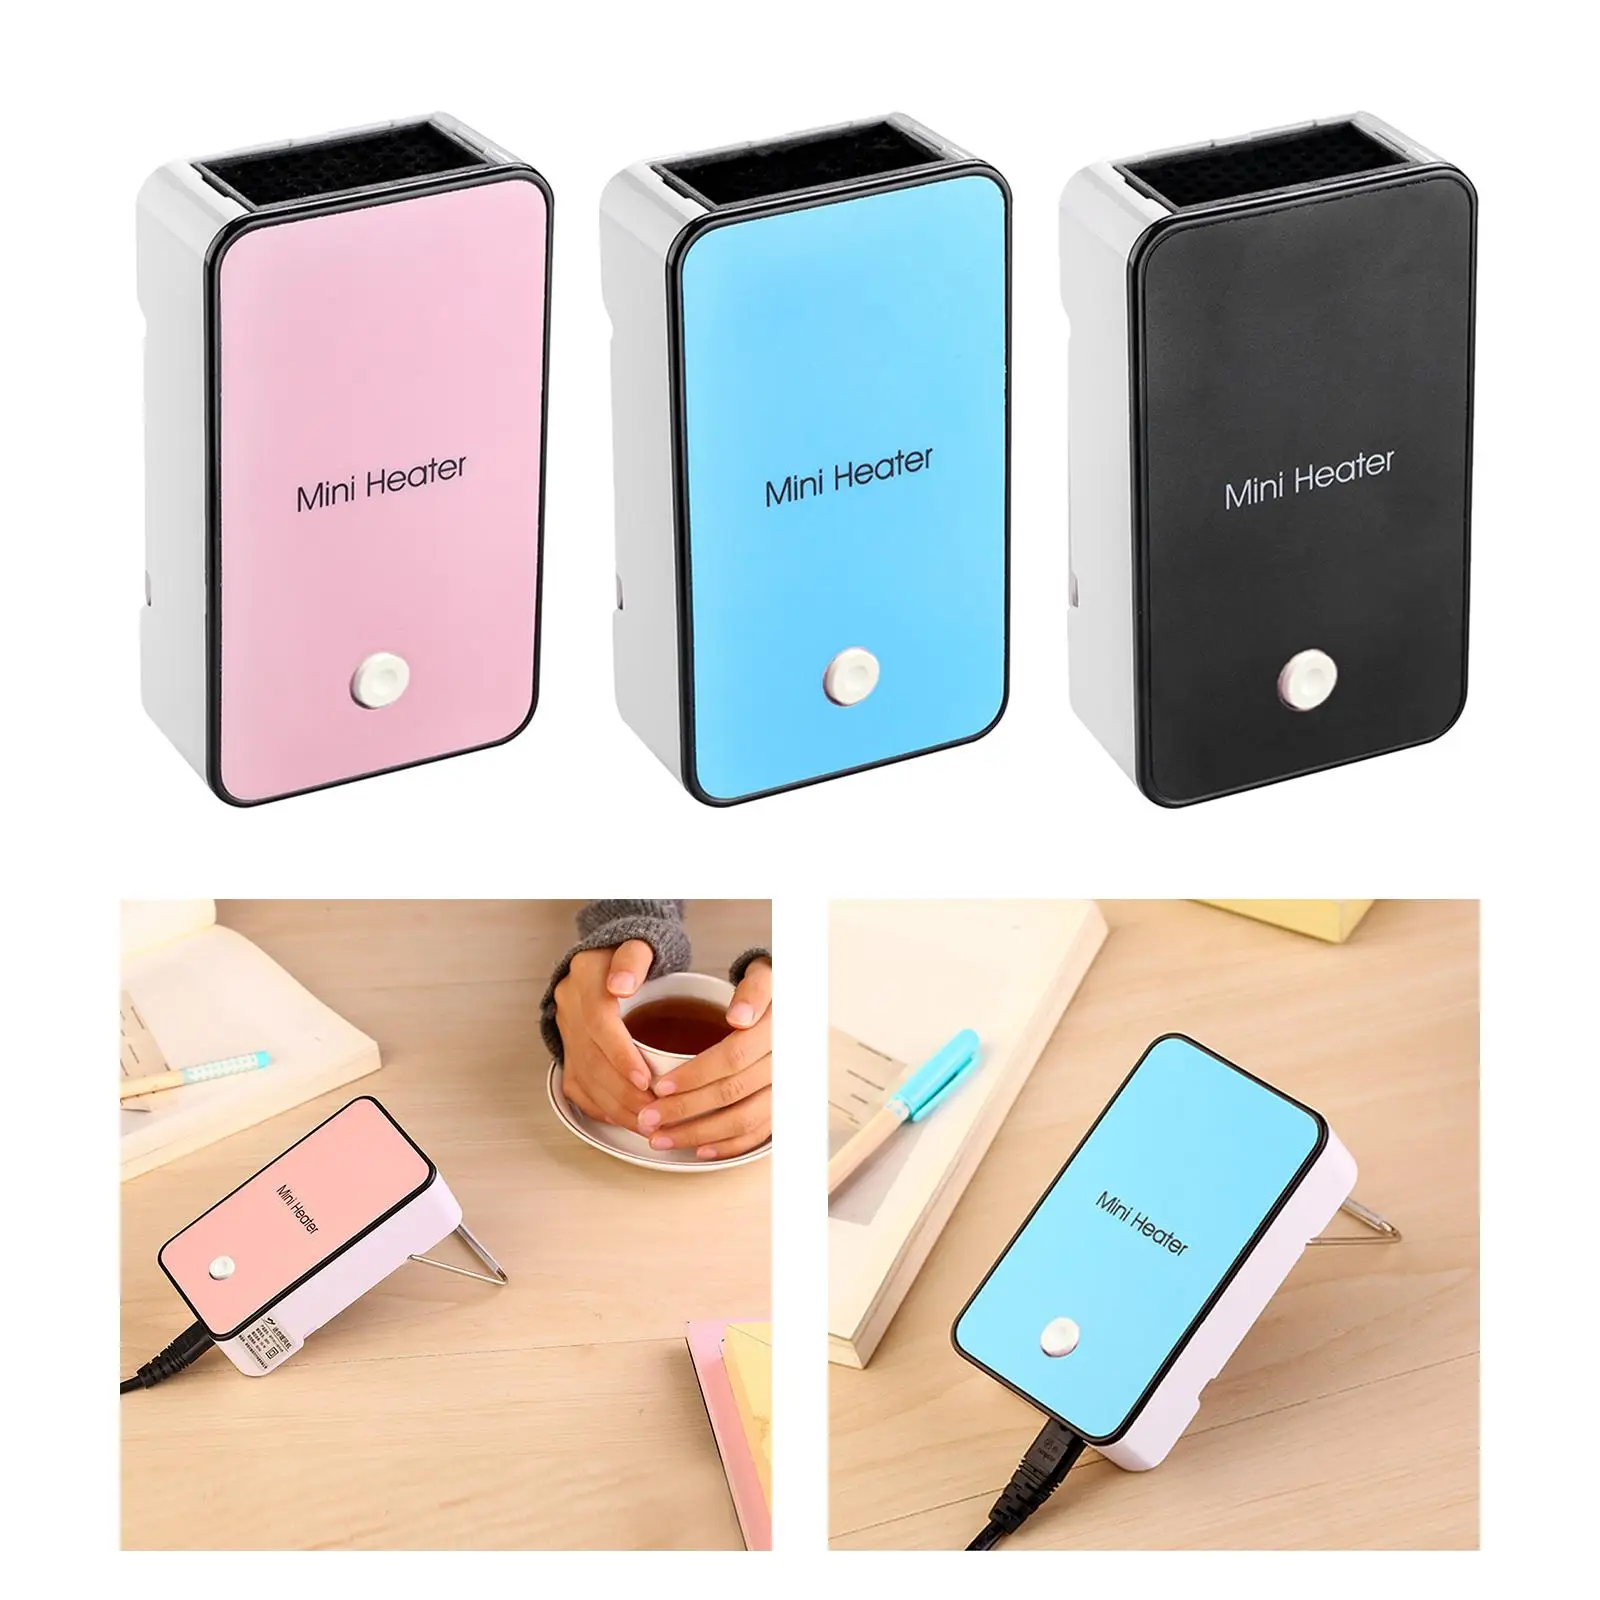 Electric Mini Heater Gifts Heating Tool for Desktop Traveling Living Room